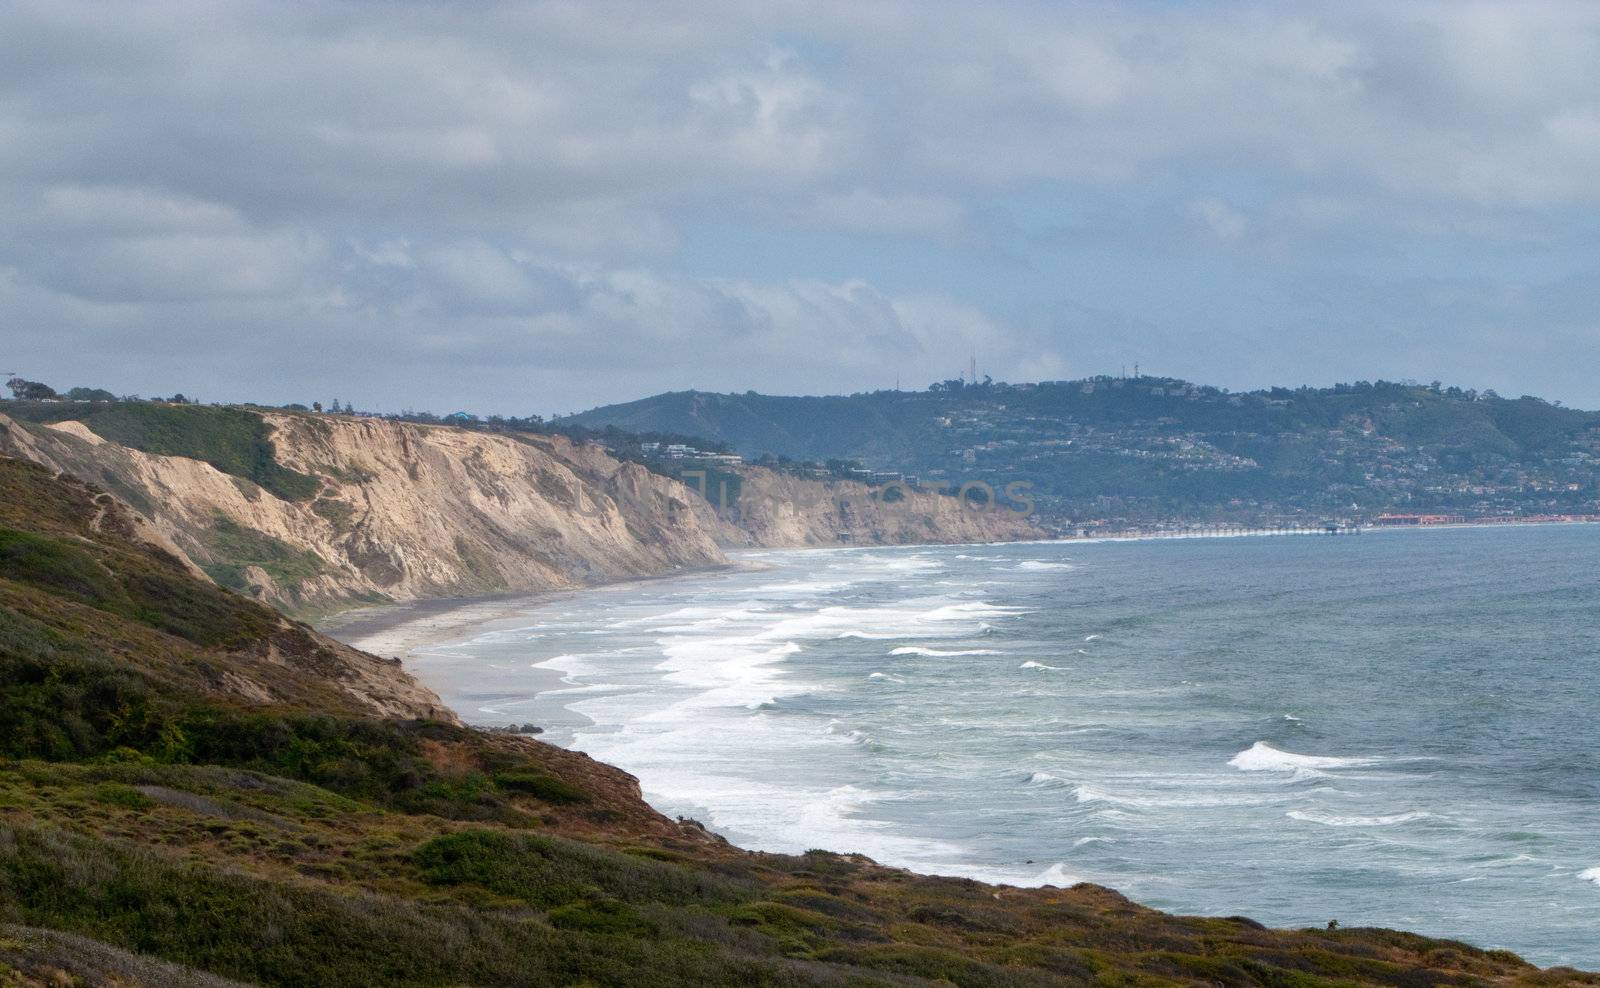 View down the cliffs and bay towards La Jolla in Southern California with Del Mar in the near distance